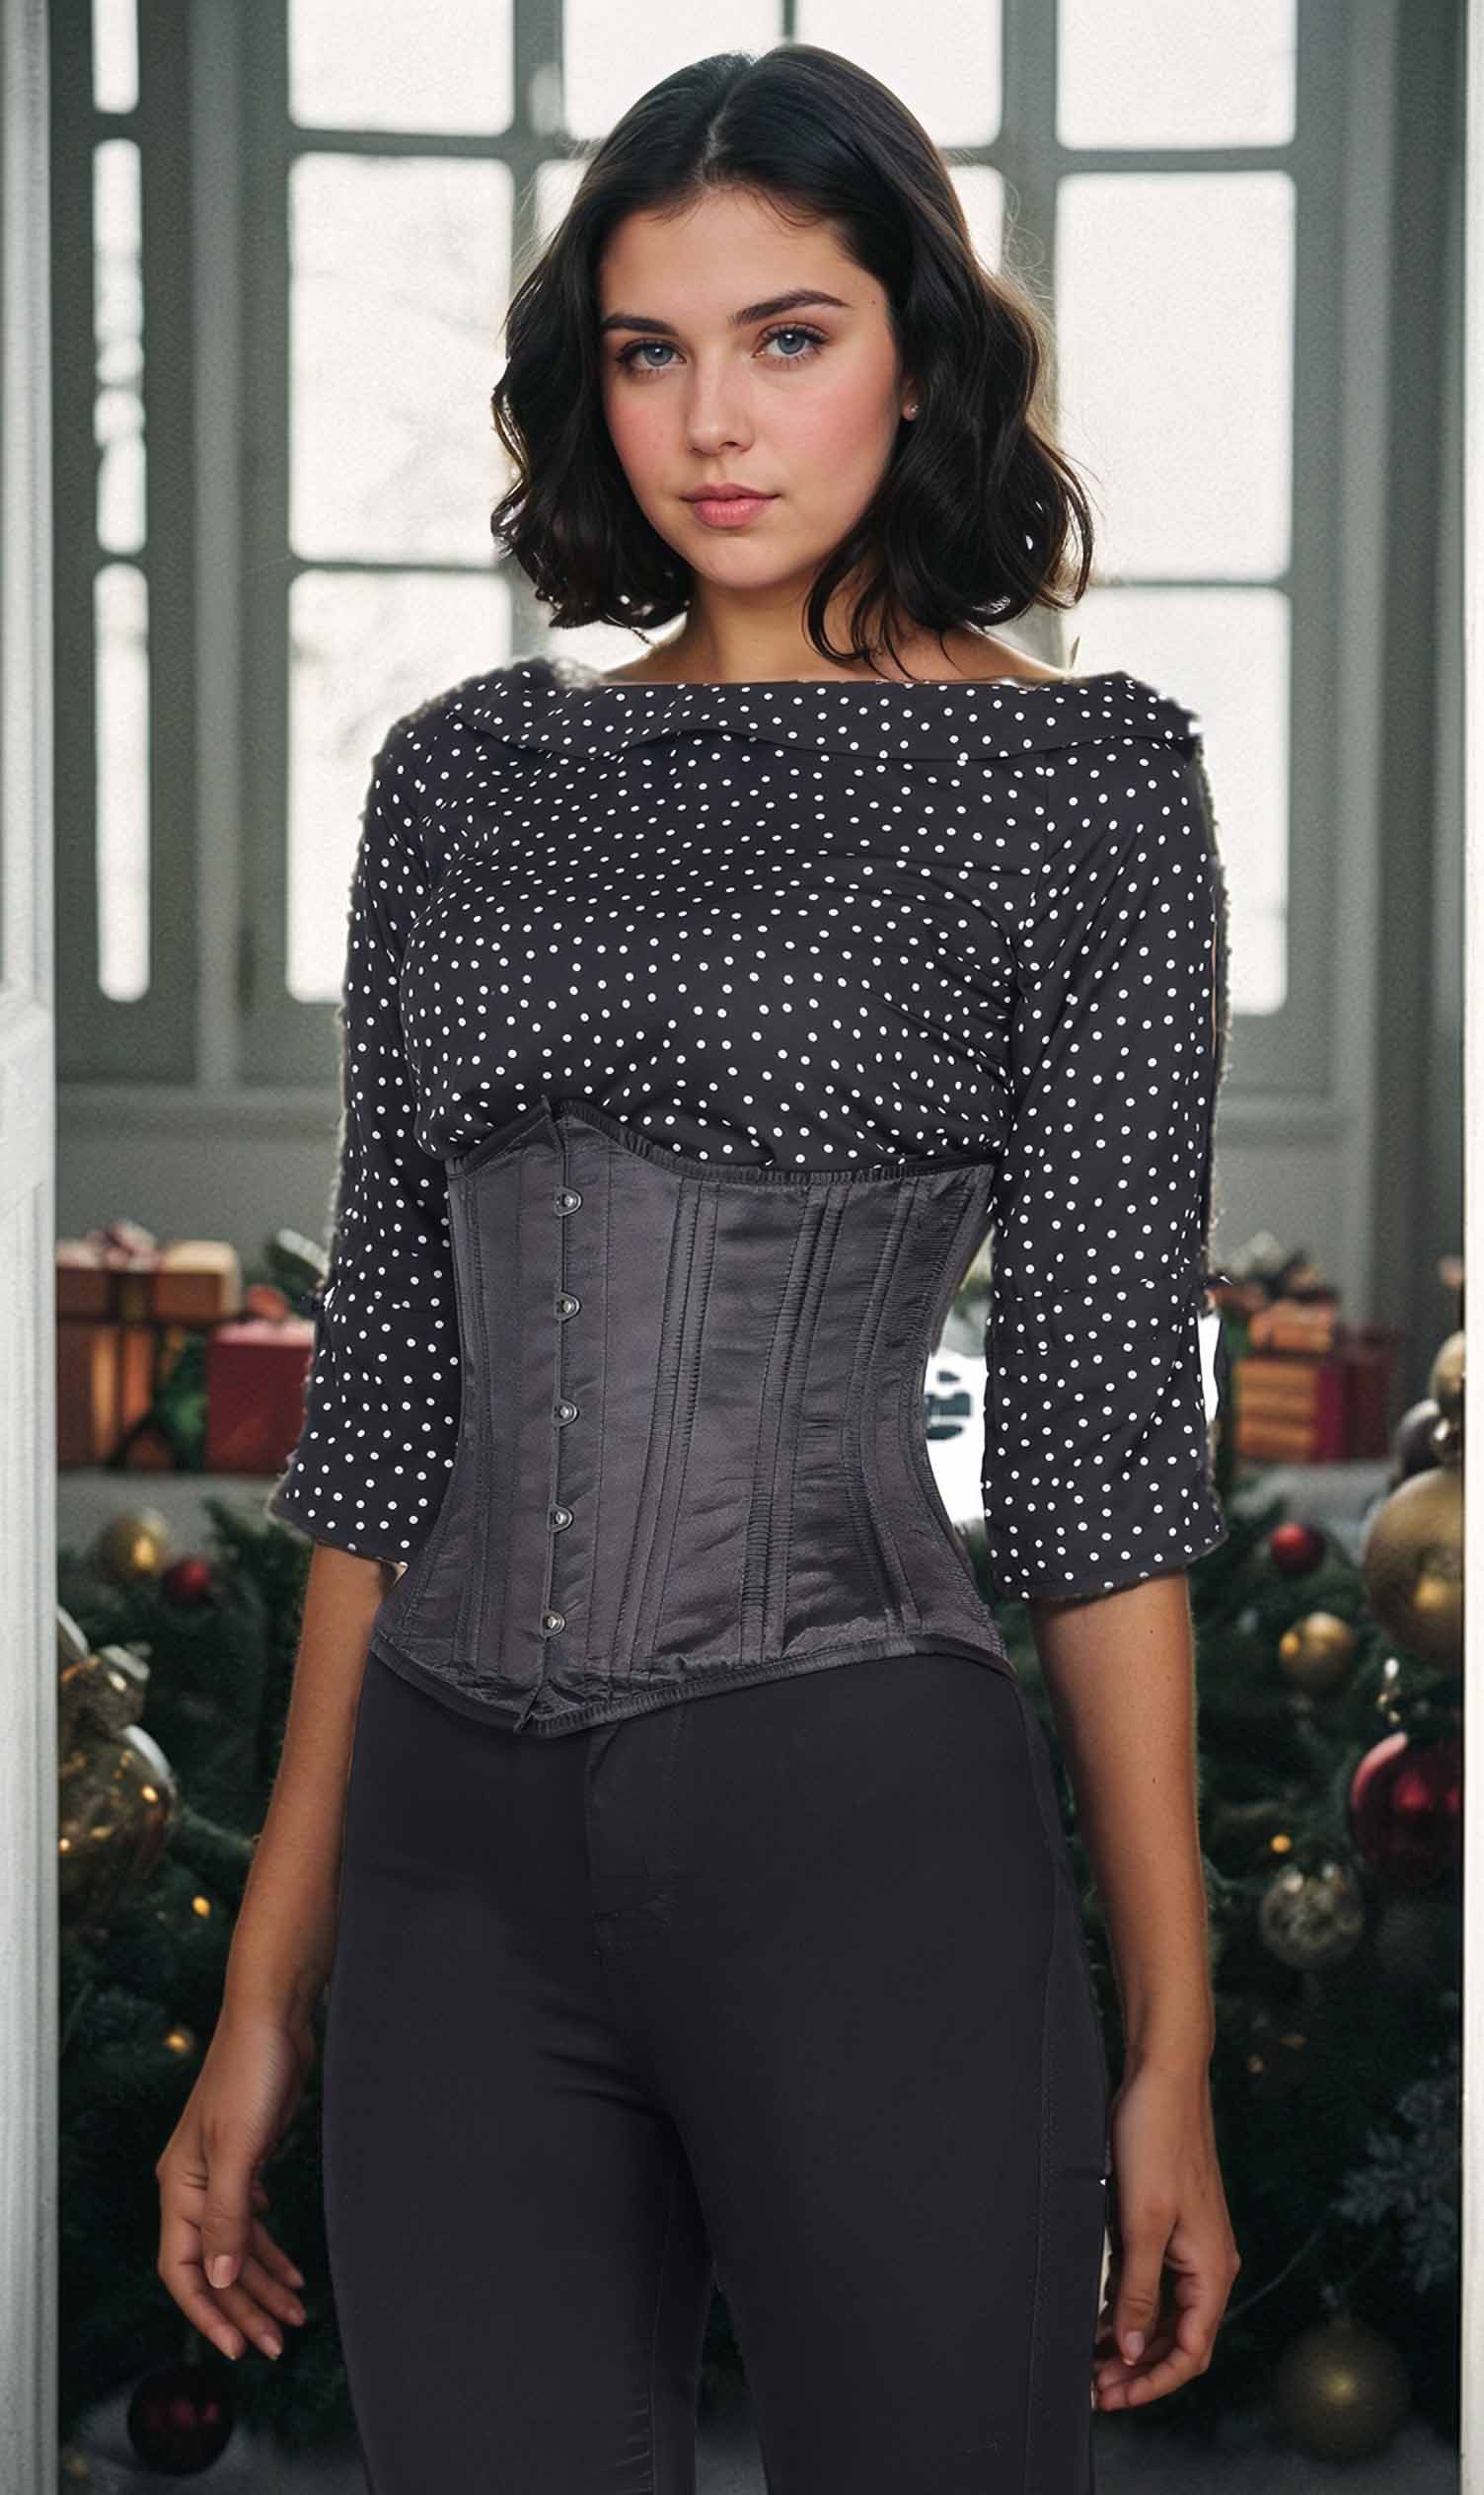 How to Choose a Corset?  Authentic corsets, Waist training corset